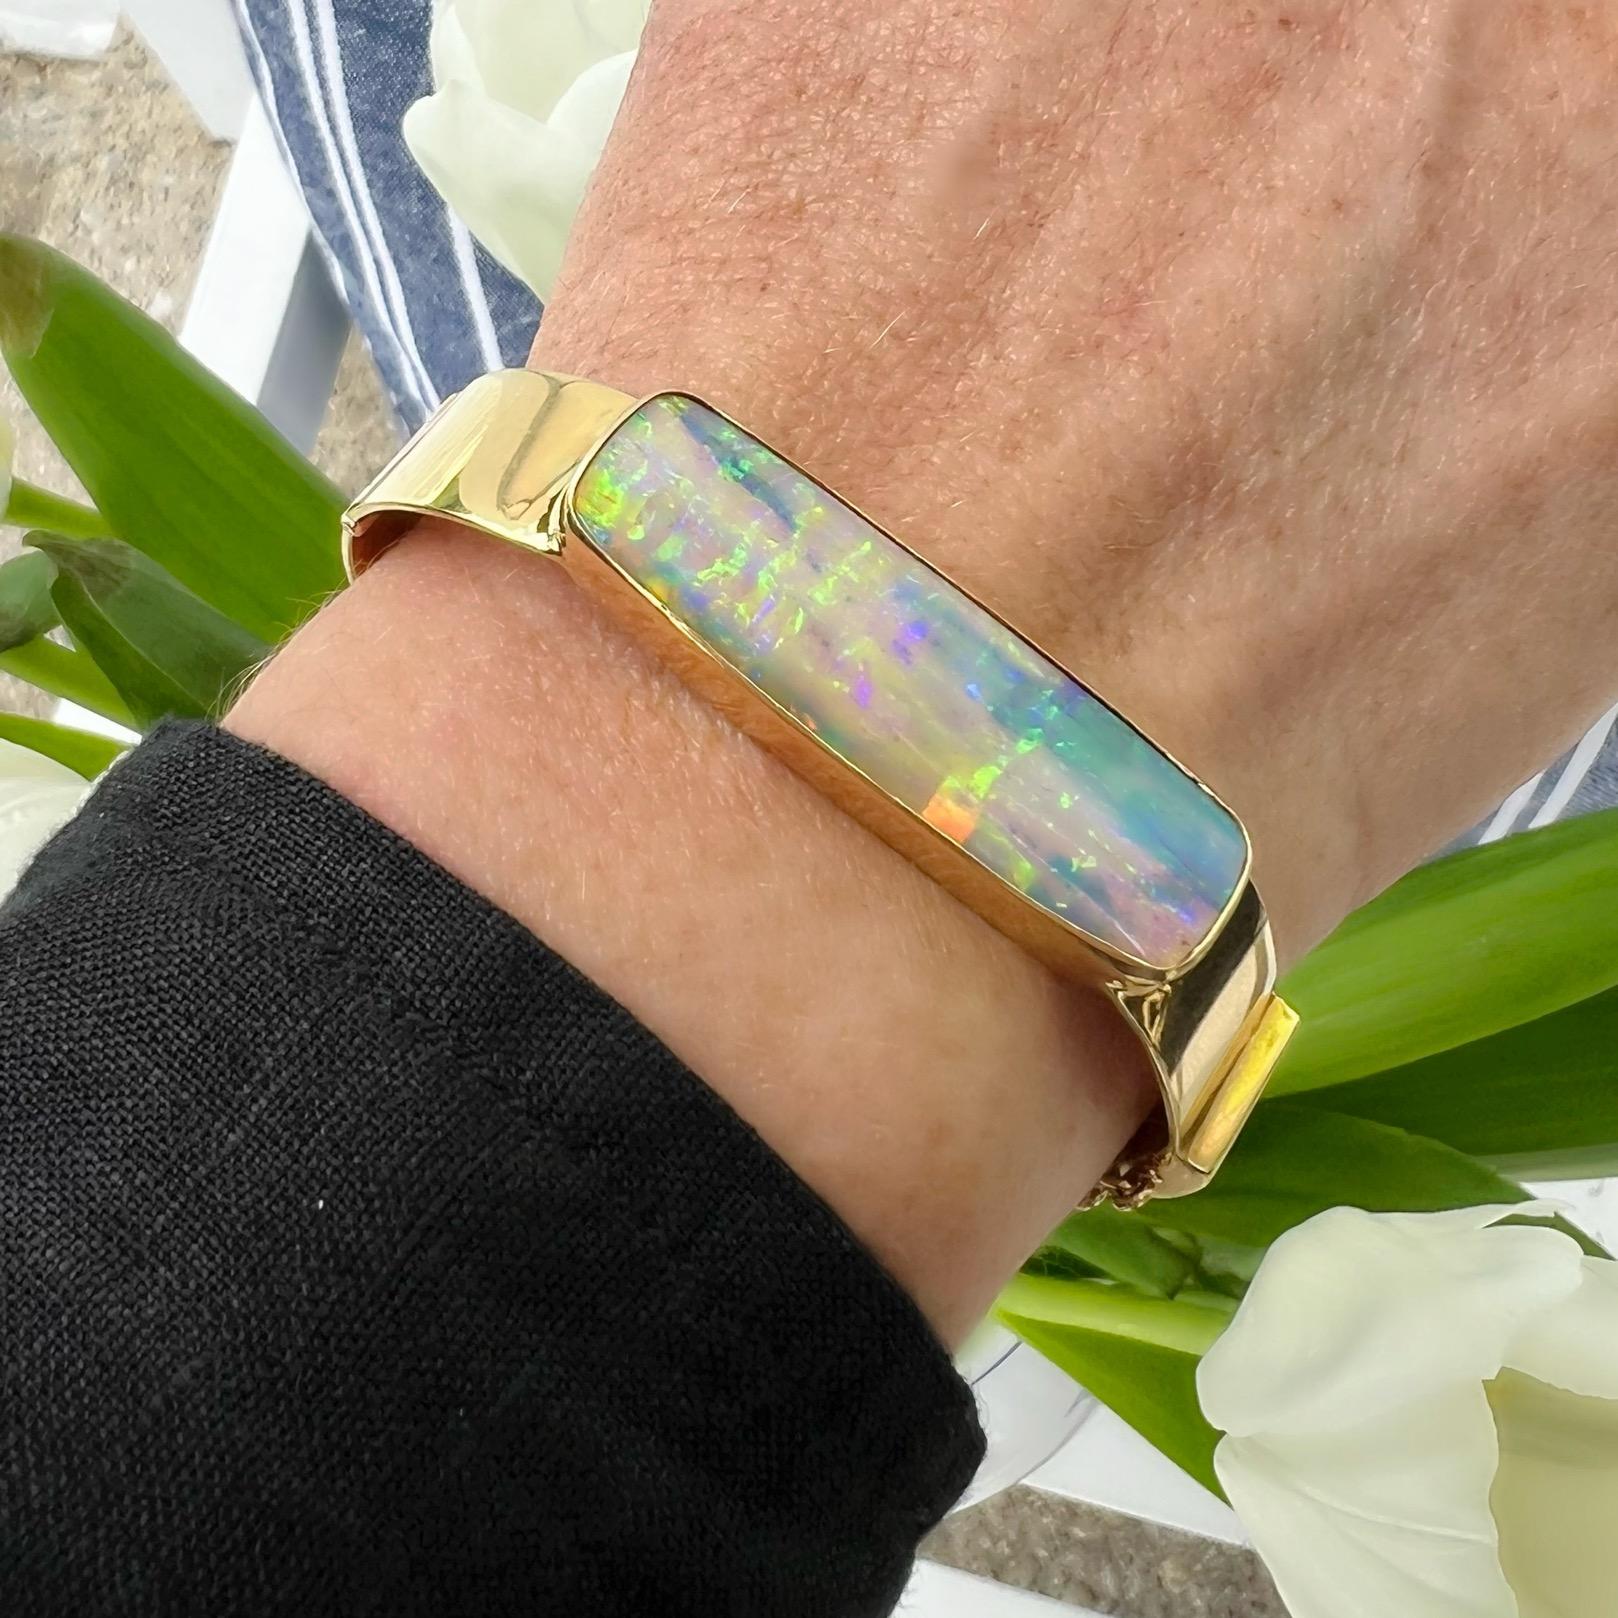 The perfect piece of wrist candy! This 18 karat yellow gold bracelet features an Australian opal weighing approximately 25 carats displaying vibrant light pinks, greens and blues throughout. The bracelet measures 12.5mm at its widest point, weighs